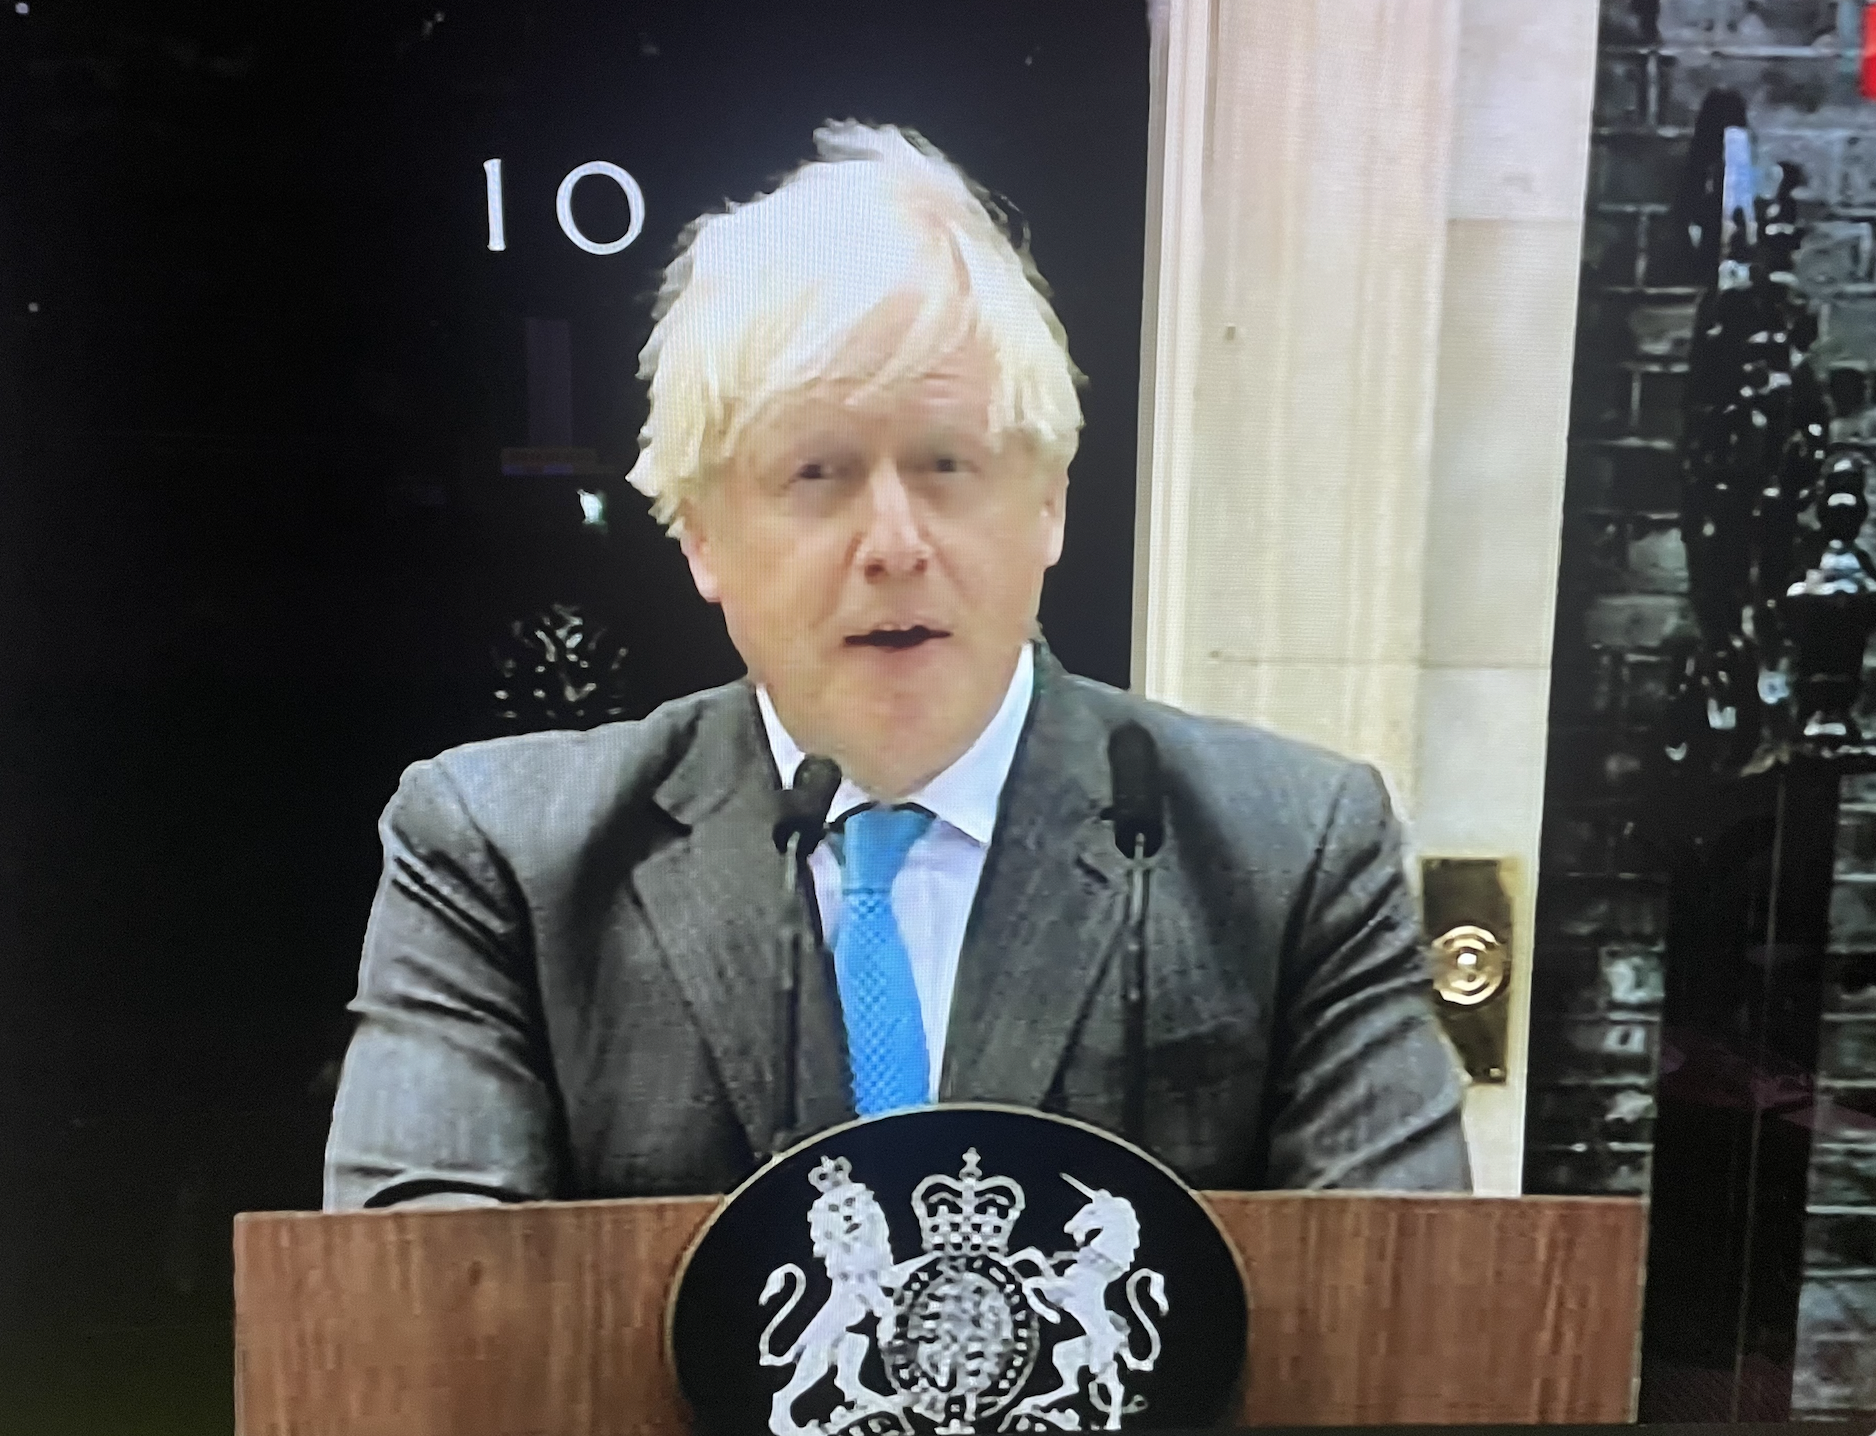 Boris Johnson the outgoing Prime Minister offering his speech at No 10 Downing Street. 